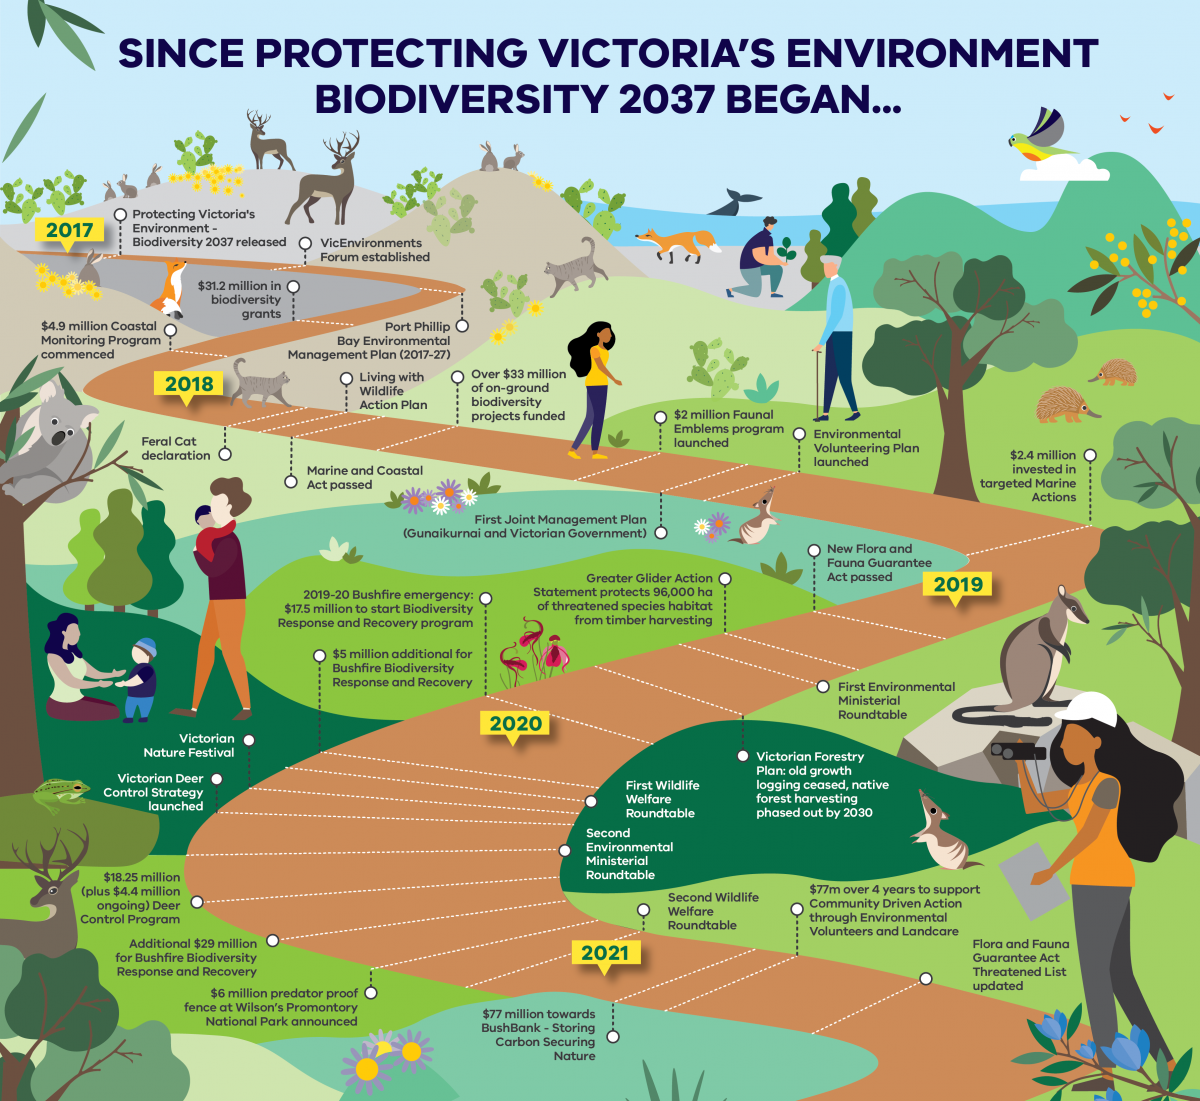 Accessible word version of the Infographic – Since Biodiversity 2037 Began  This infographic lists key actions taken by the Victorian Government to improve the natural environment since Protecting Victoria's Environment - Biodiversity 2037 was released. It features a header with the text ‘Since protecting Victoria’s Environment Biodiversity 2037 began…’, then features a winding path on the ground which steps the viewer through 2017 to 2021. Along the path is a list of actions that took place in each year which is listed below. The infographic is surrounded by designed graphics of animals, plants, landscapes, and people. It also features invasive species such as deer, cats, and foxes.  The visual path on the ground timeline features the following in chronological order since they were released:  2017  *Protecting Victoria's Environment - Biodiversity 2037 Plan released *VicEnvironments Forum established *Port Phillip Bay Environmental Management Plan (2017-27) *$31.2 million in biodiversity grants *$4.9 million Coastal Monitoring Program commenced  2018  *Feral Cat declaration *Living with Wildlife Action Plan *Marine and Coastal Act passed *Over $33 million of on-ground biodiversity projects funded *$2 million Faunal Emblems program launched *First Joint Management Plan (Gunaikurnai and Victorian Government) *Environmental Volunteering Plan launched *$2.4 million invested in targeted Marine Actions  2019  *New Flora and Fauna Guarantee Act passed *Greater Glider Action Statement protects 96,000 hectares of threatened species habitat from timber harvesting *First Environmental Ministerial Roundtable *Victorian Forestry Plan: old growth logging ceased, native forest harvesting phased out by 2030 *2019-20 Bushfire emergency: $17.5 million to start Biodiversity Response and Recovery program  2020  *$5 million additional for Bushfire Biodiversity Response and Recovery *First Wildlife Welfare Roundtable *Victorian Nature Festival *Victorian Deer Control Strategy launched *Second Environmental Ministerial Roundtable *$18.25 million (plus $4.4 million ongoing) Deer Control Program *Additional $29 million for Bushfire Biodiversity Response and Recovery *$6 million predator proof fence at Wilson’s Promontory National Park announced *Second Wildlife Welfare Roundtable  2021  *$77 million towards BushBank – Storing Carbon Securing Nature *$77 million over 4 years to support Community Driven Action through Environmental Volunteers and Landcare *Flora and Fauna Guarantee Act Threatened List updated    That is the end of the infographic.